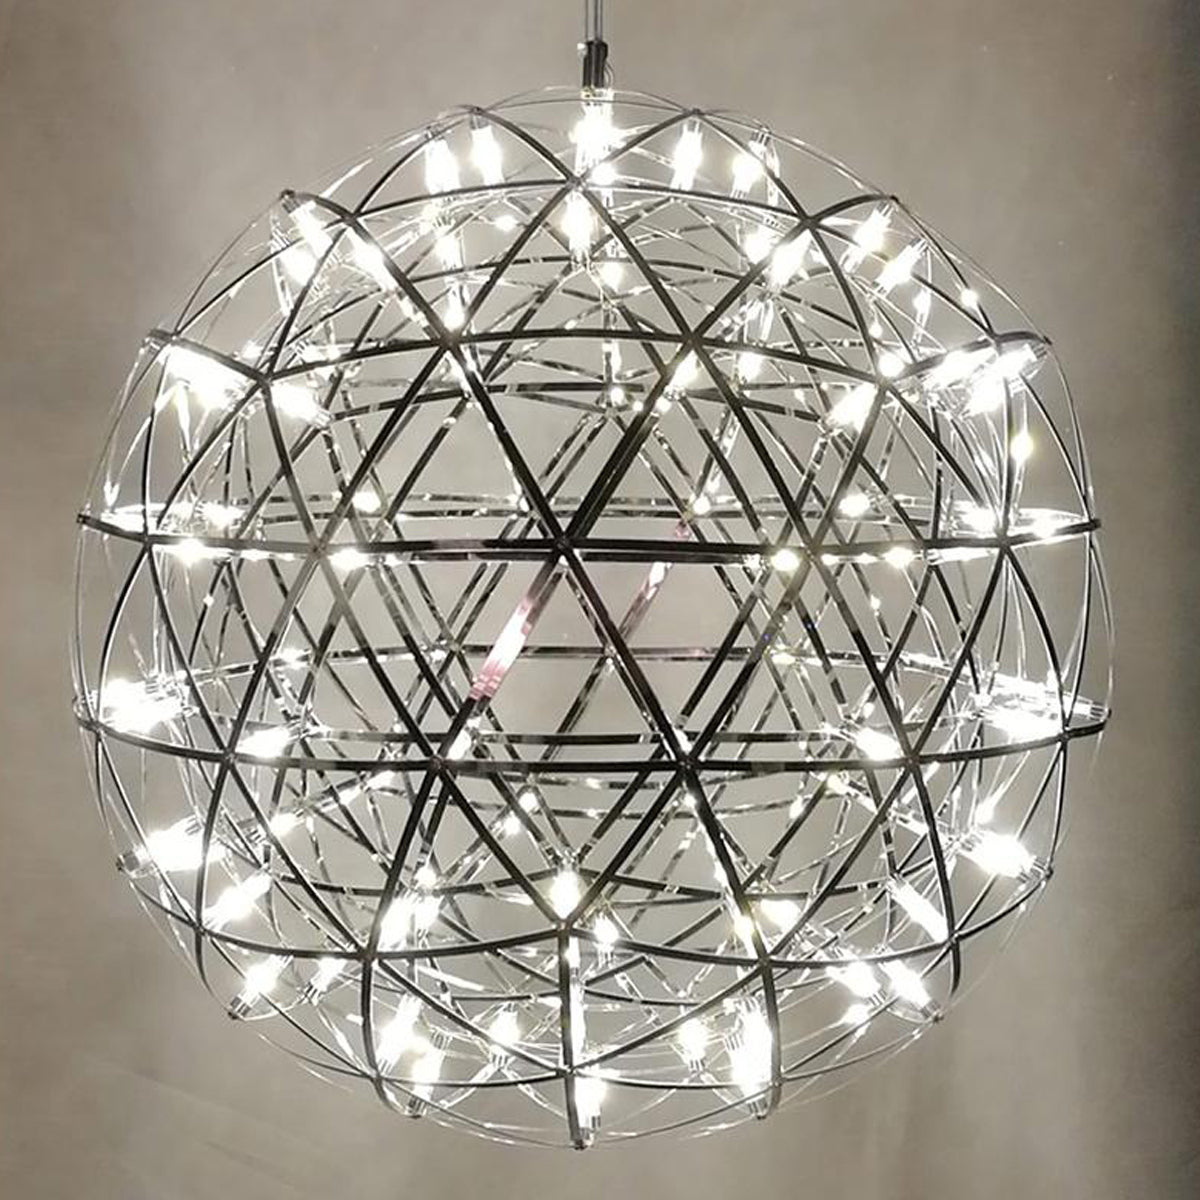 CGC FAWKES Chrome Silver Firework / Starburst Chandelier - Choice Of Size